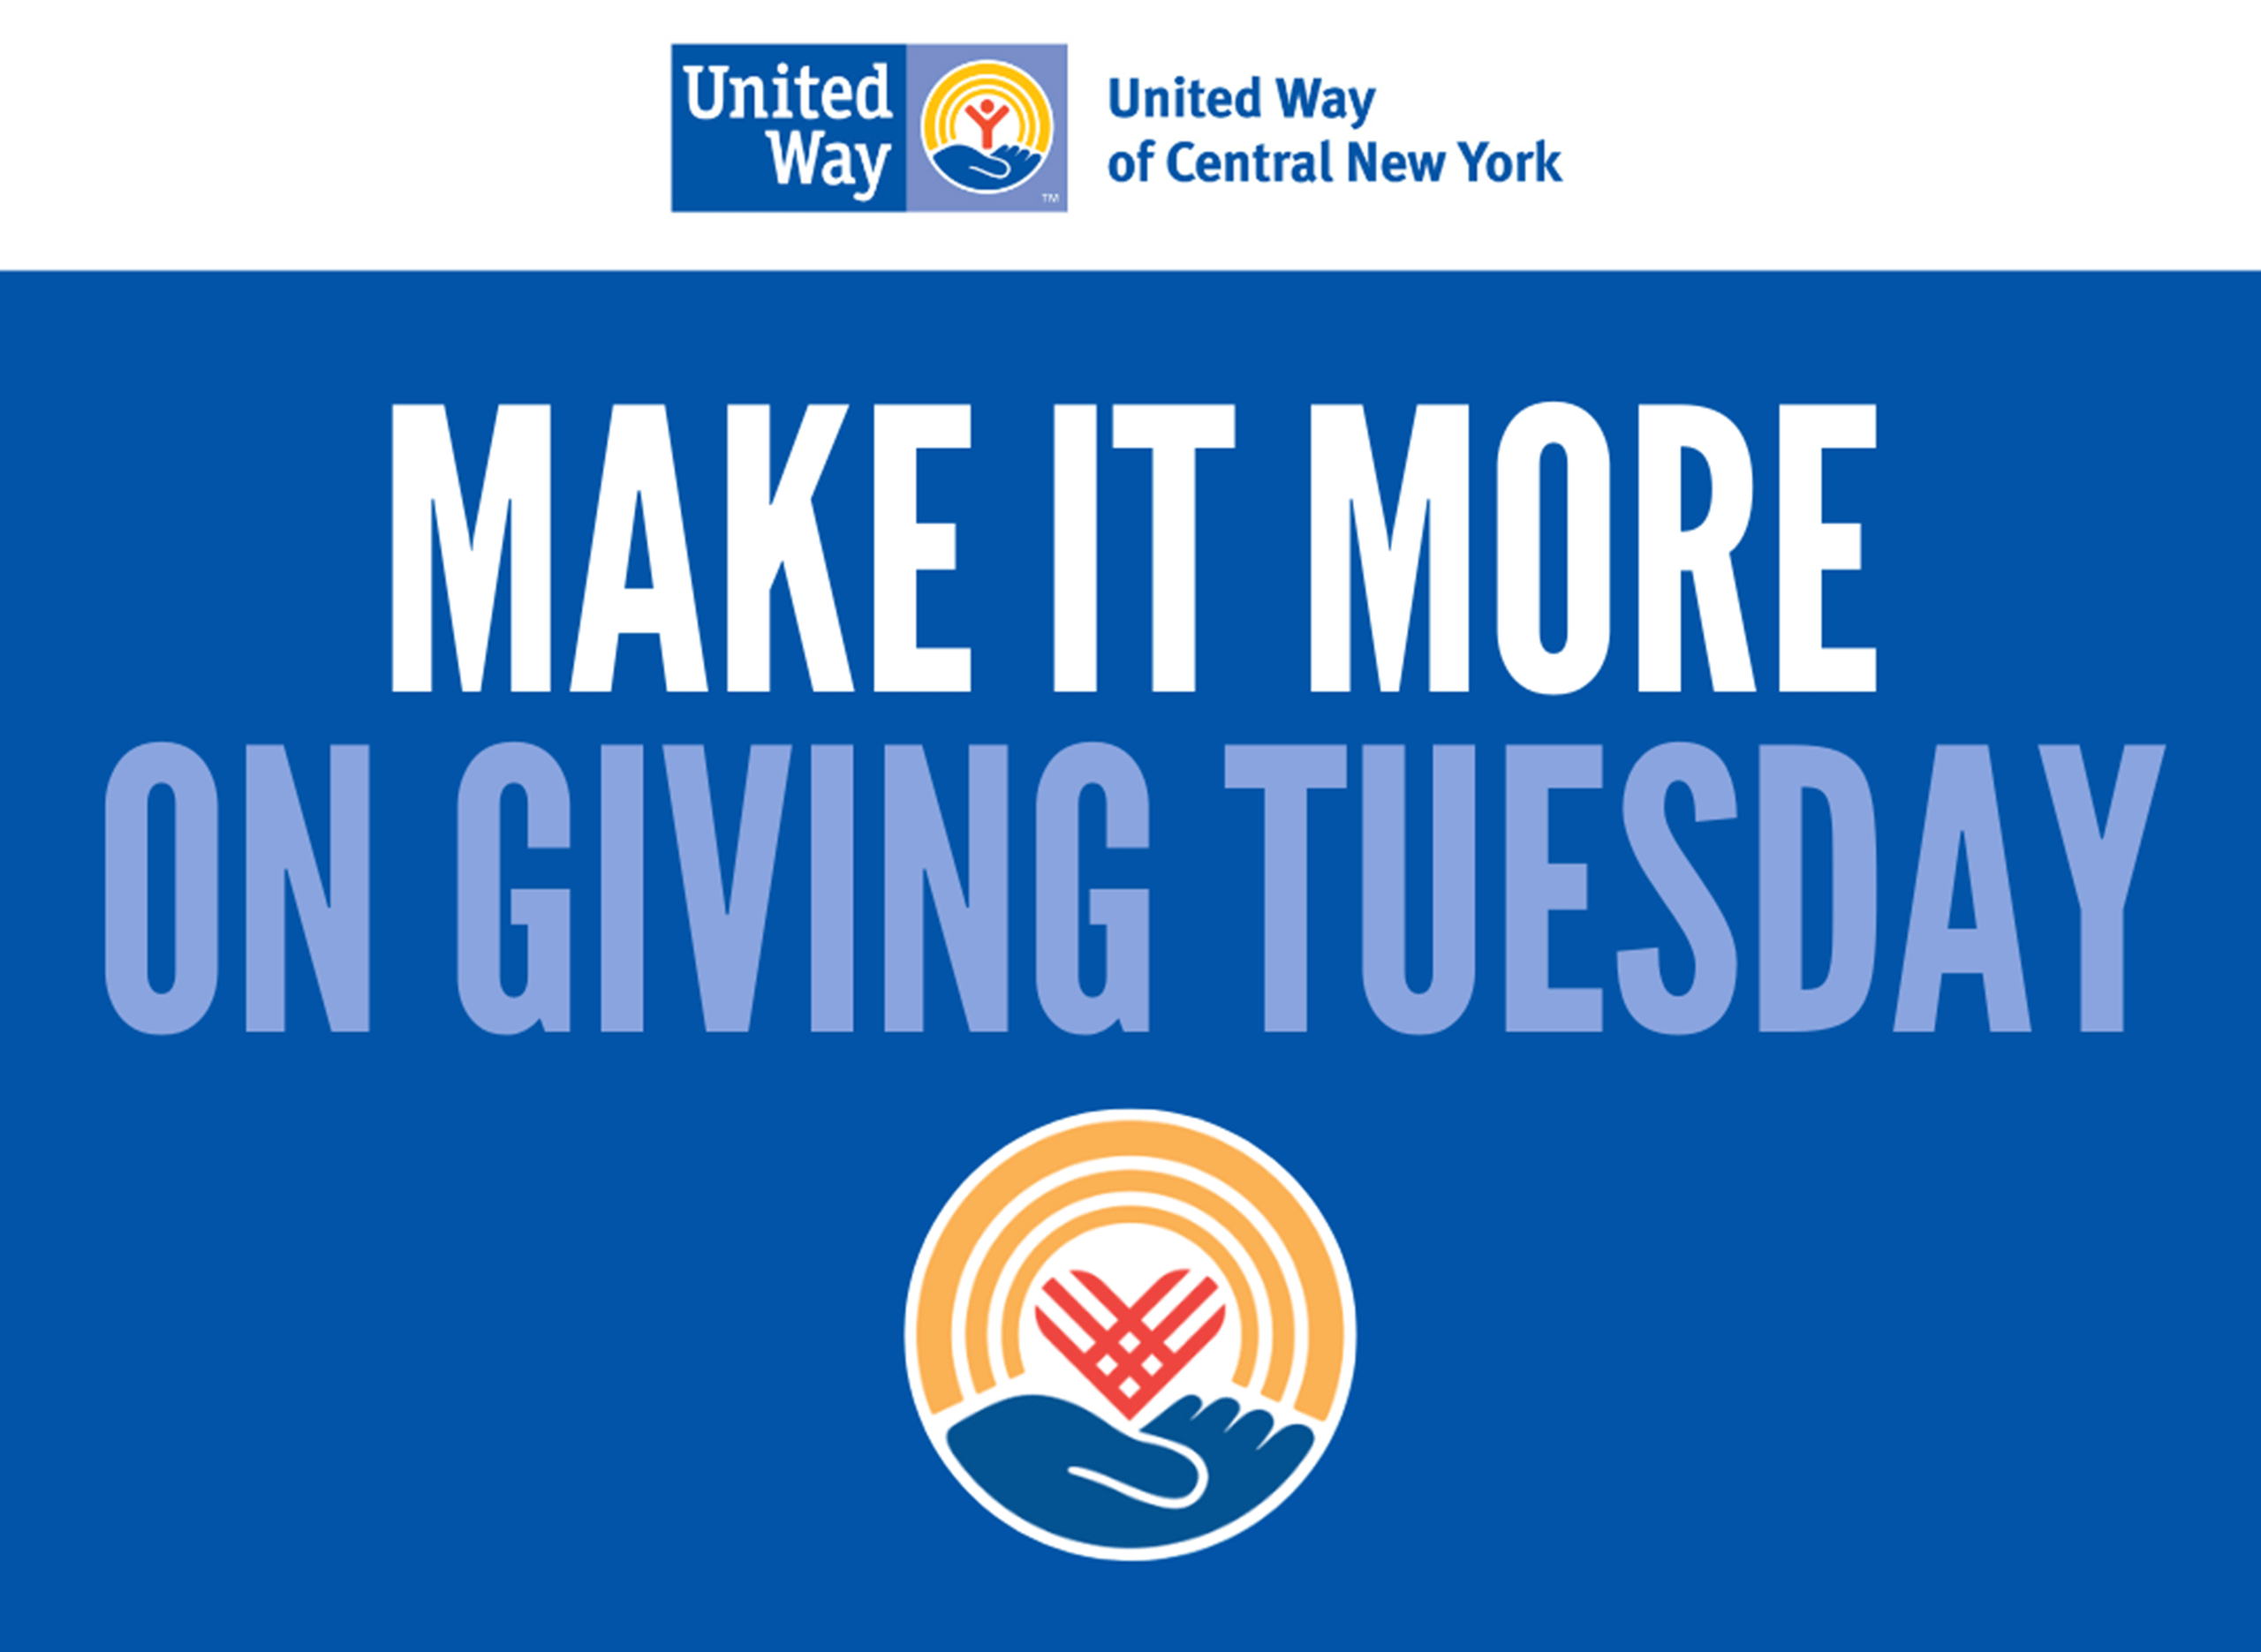 “Make It More” On Giving Tuesday